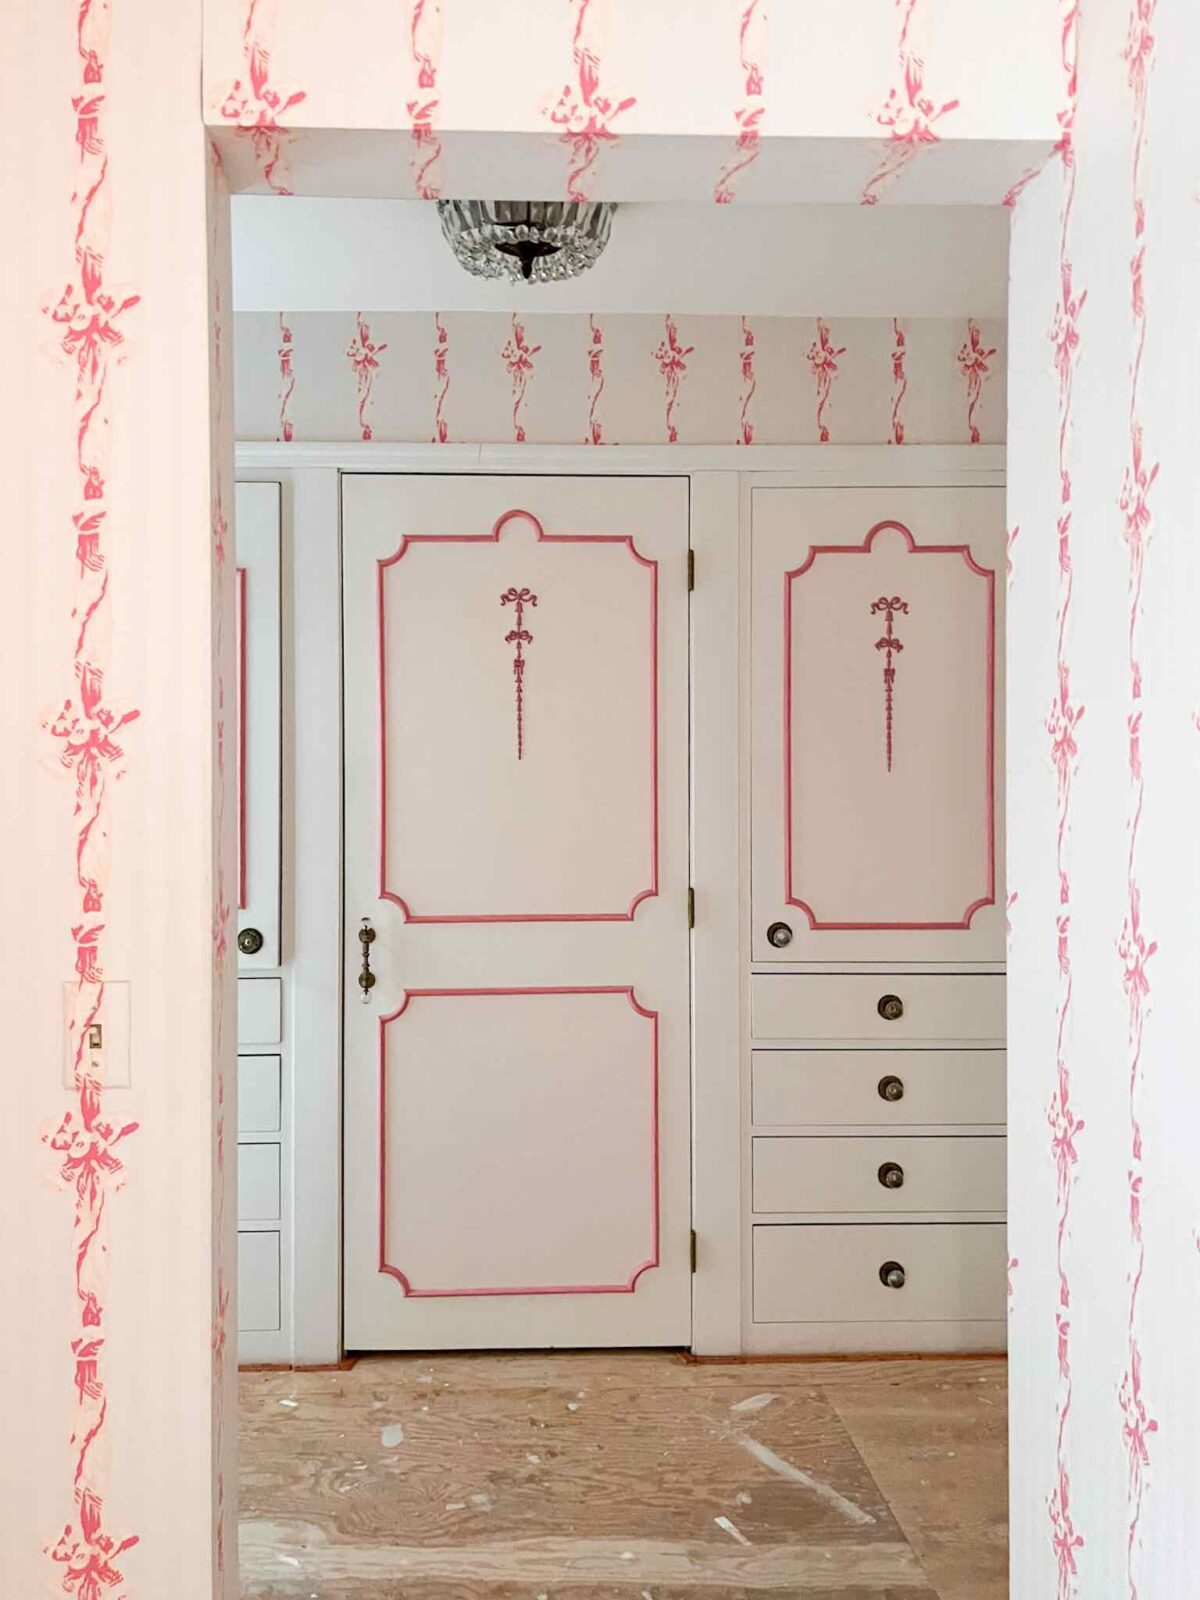 Dressing room with pink design details on the wallpaper and woodwork